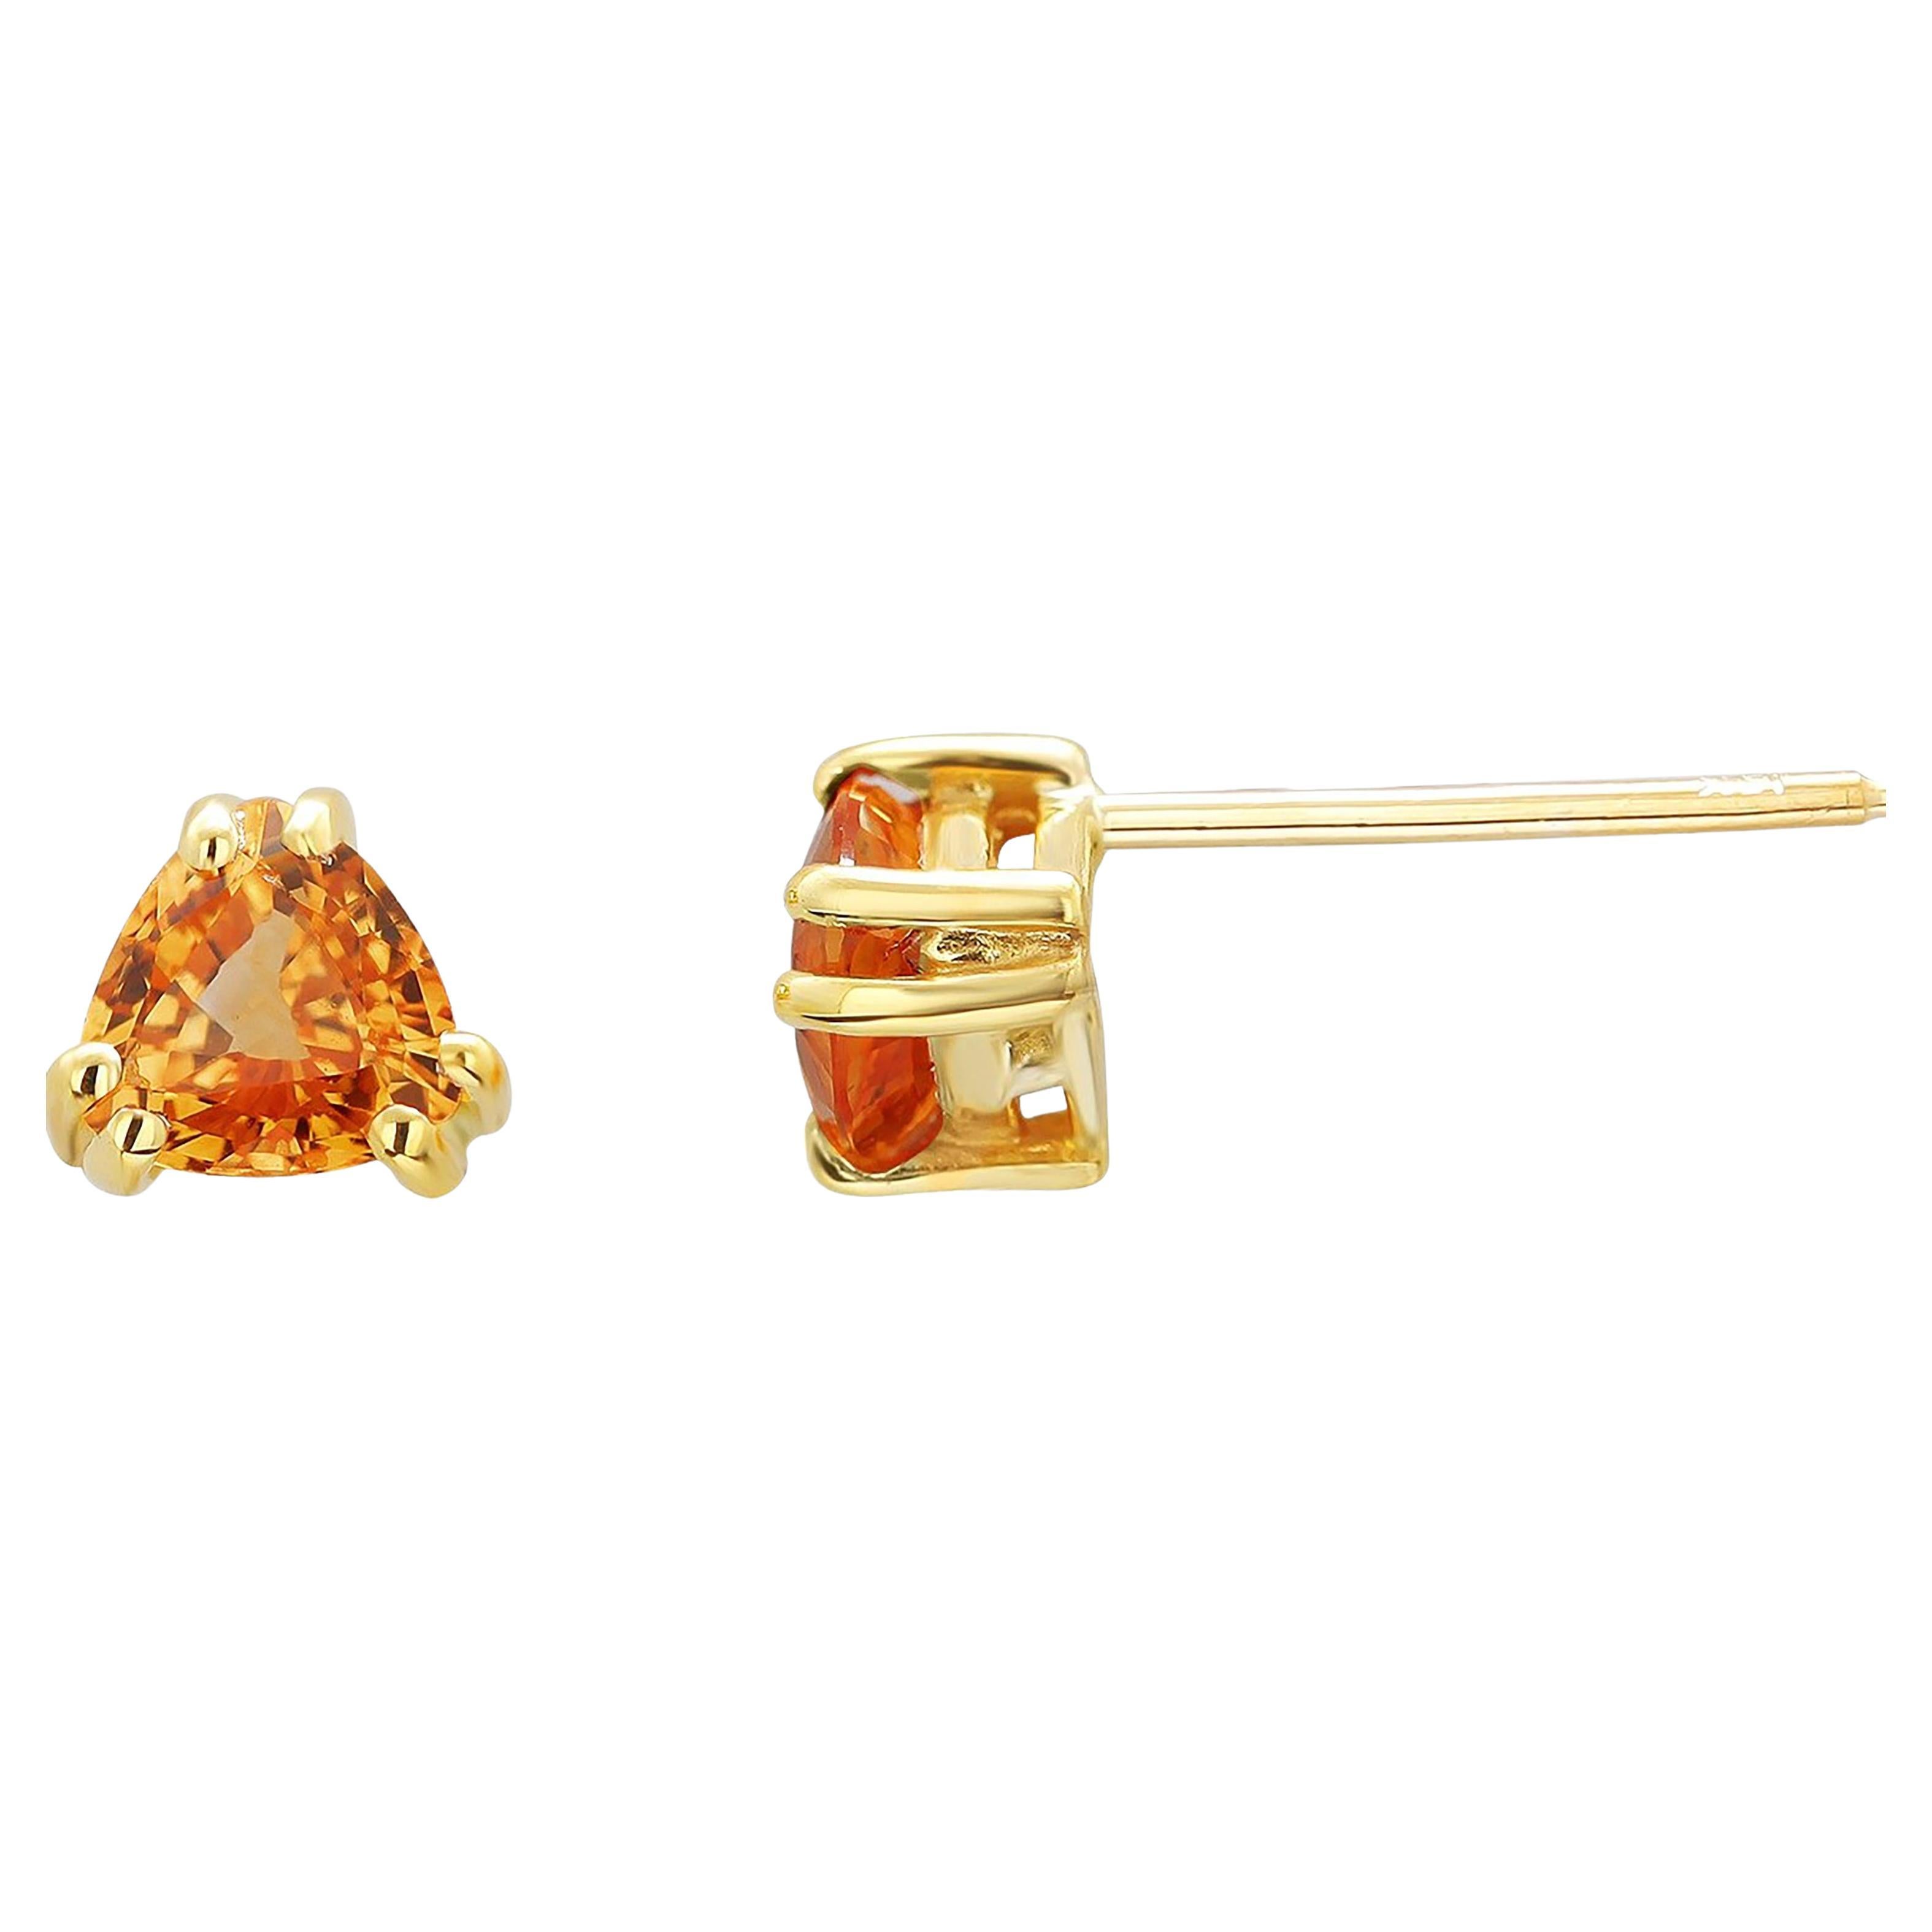 Matched Triangle Shaped Ceylon Yellow Sapphire 0.90 Carat Gold Stud Earrings